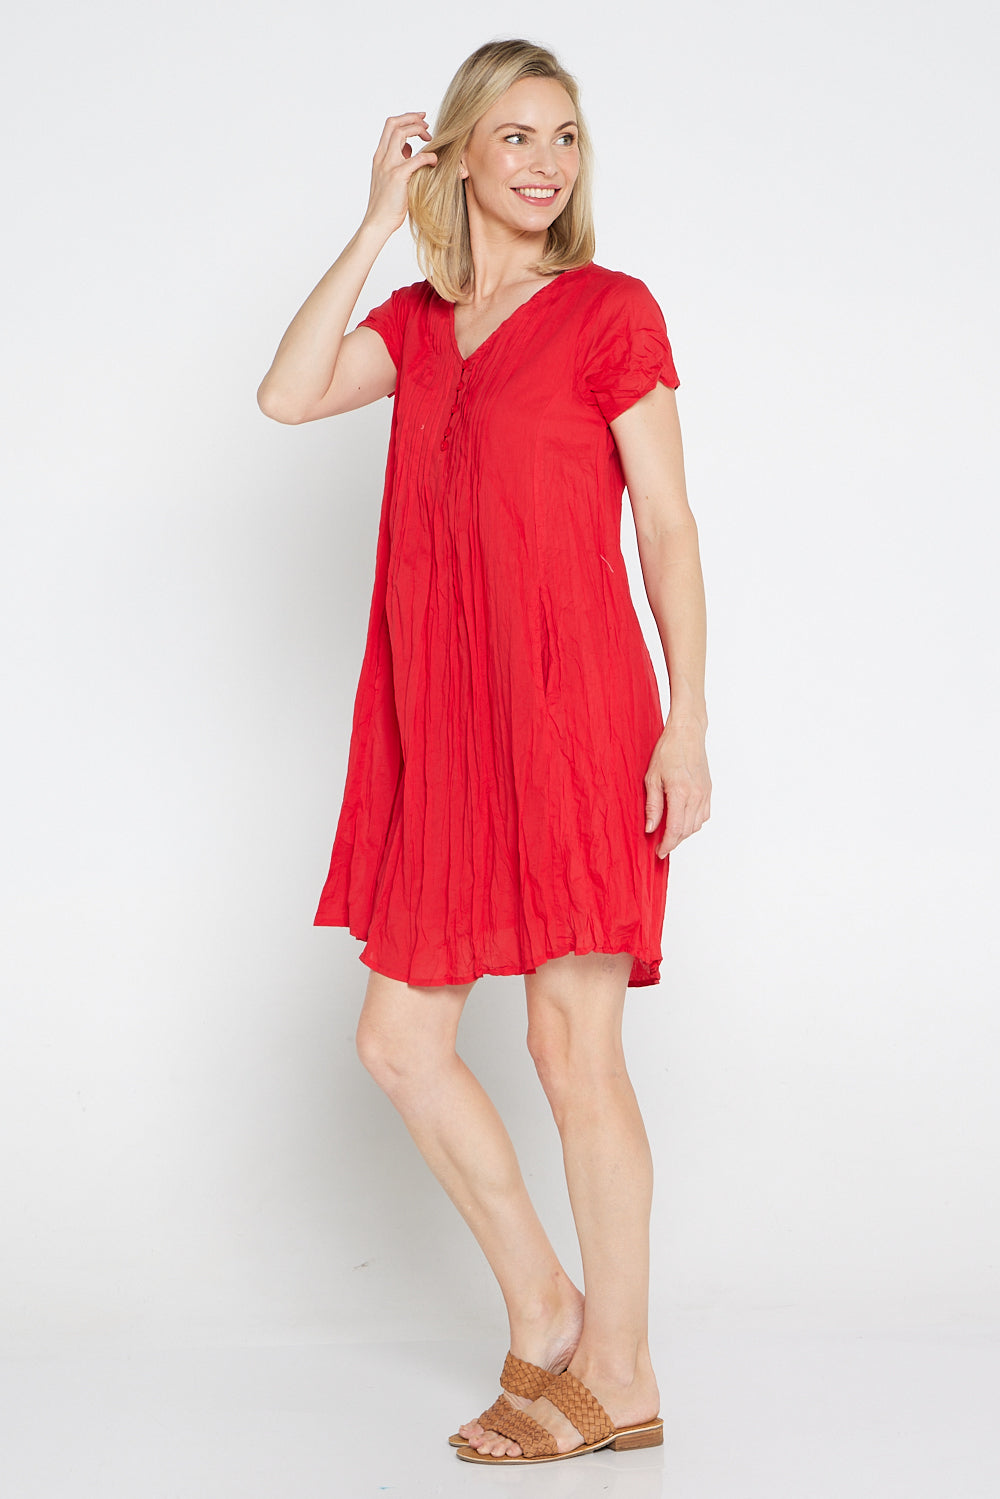 Taylor Cap Sleeve Cotton Dress - Red